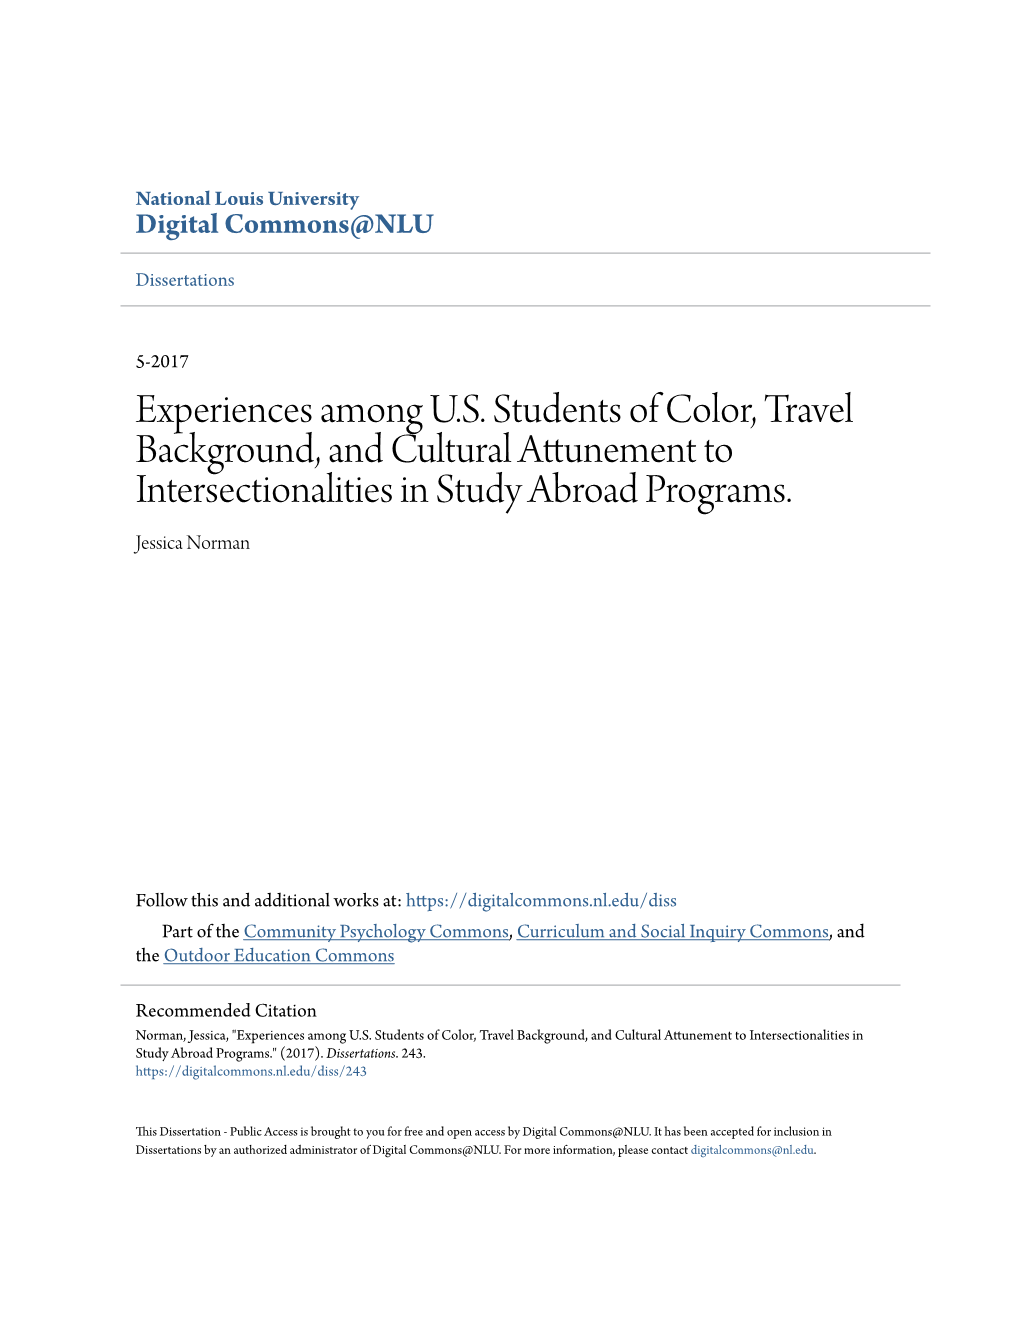 Experiences Among U.S. Students of Color, Travel Background, and Cultural Attunement to Intersectionalities in Study Abroad Programs